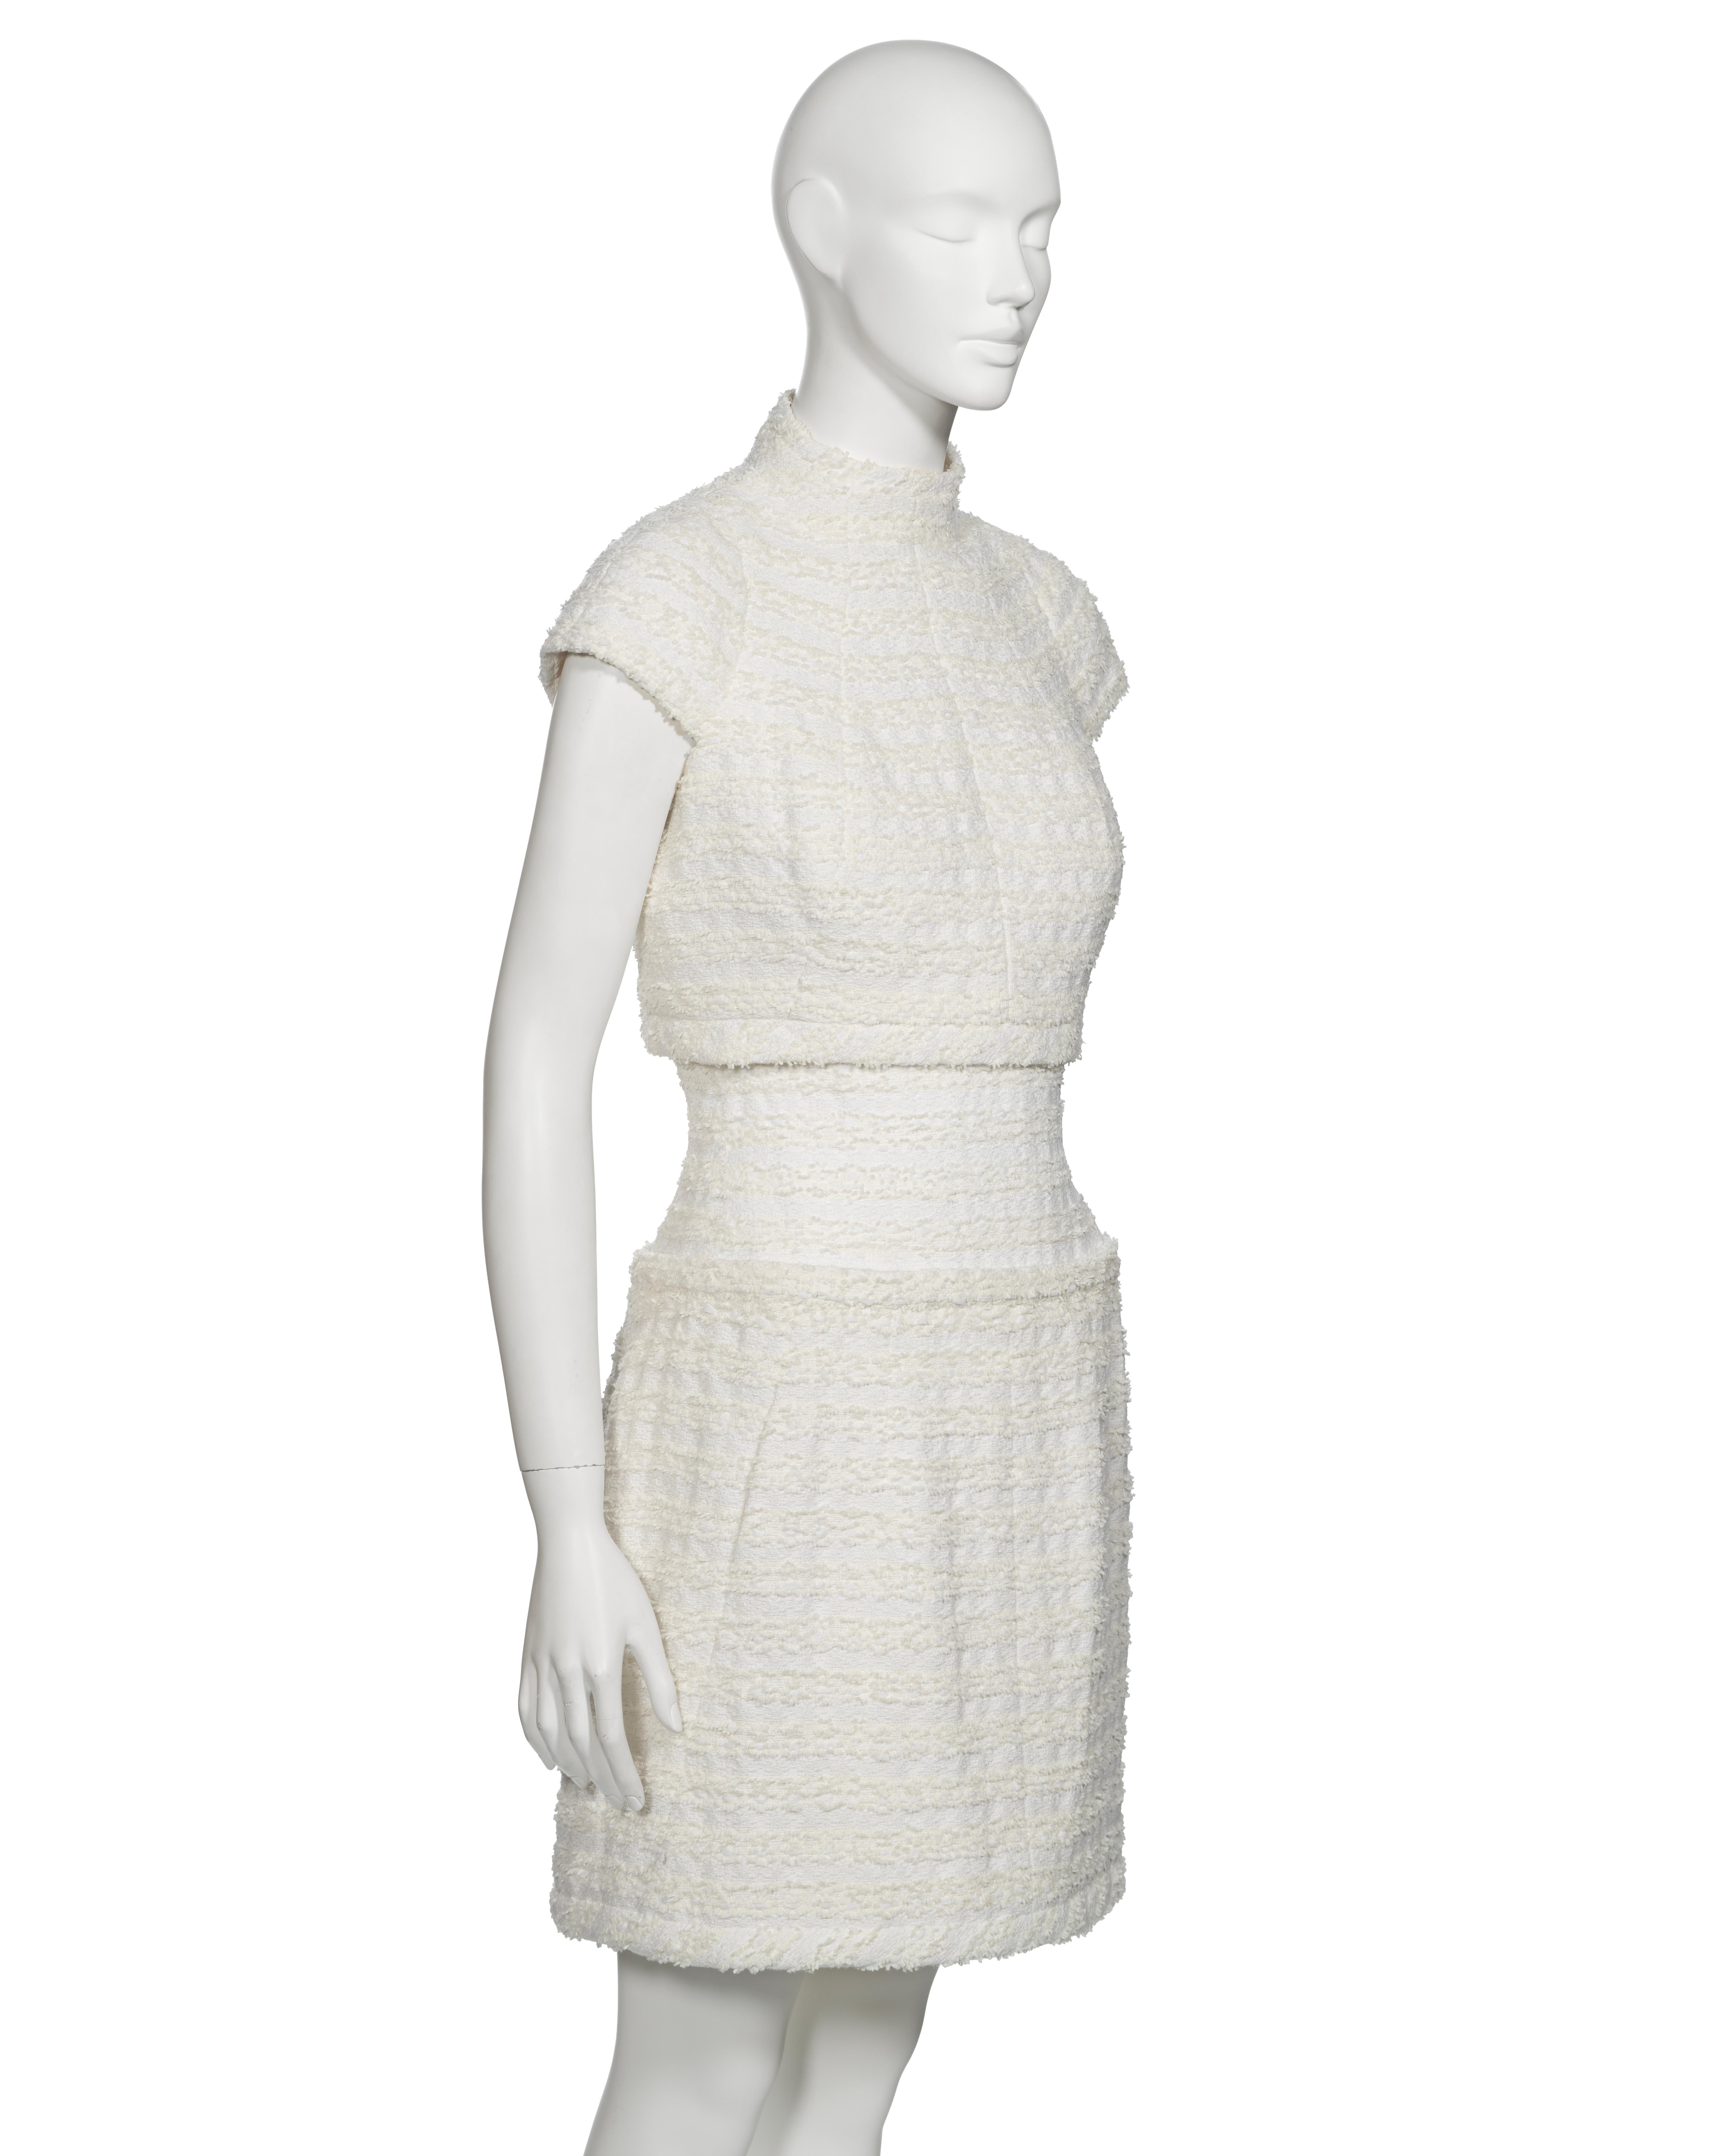 Chanel by Karl Lagerfeld Haute Couture White Bouclé Corseted Skirt Suit, ss 2014 For Sale 1